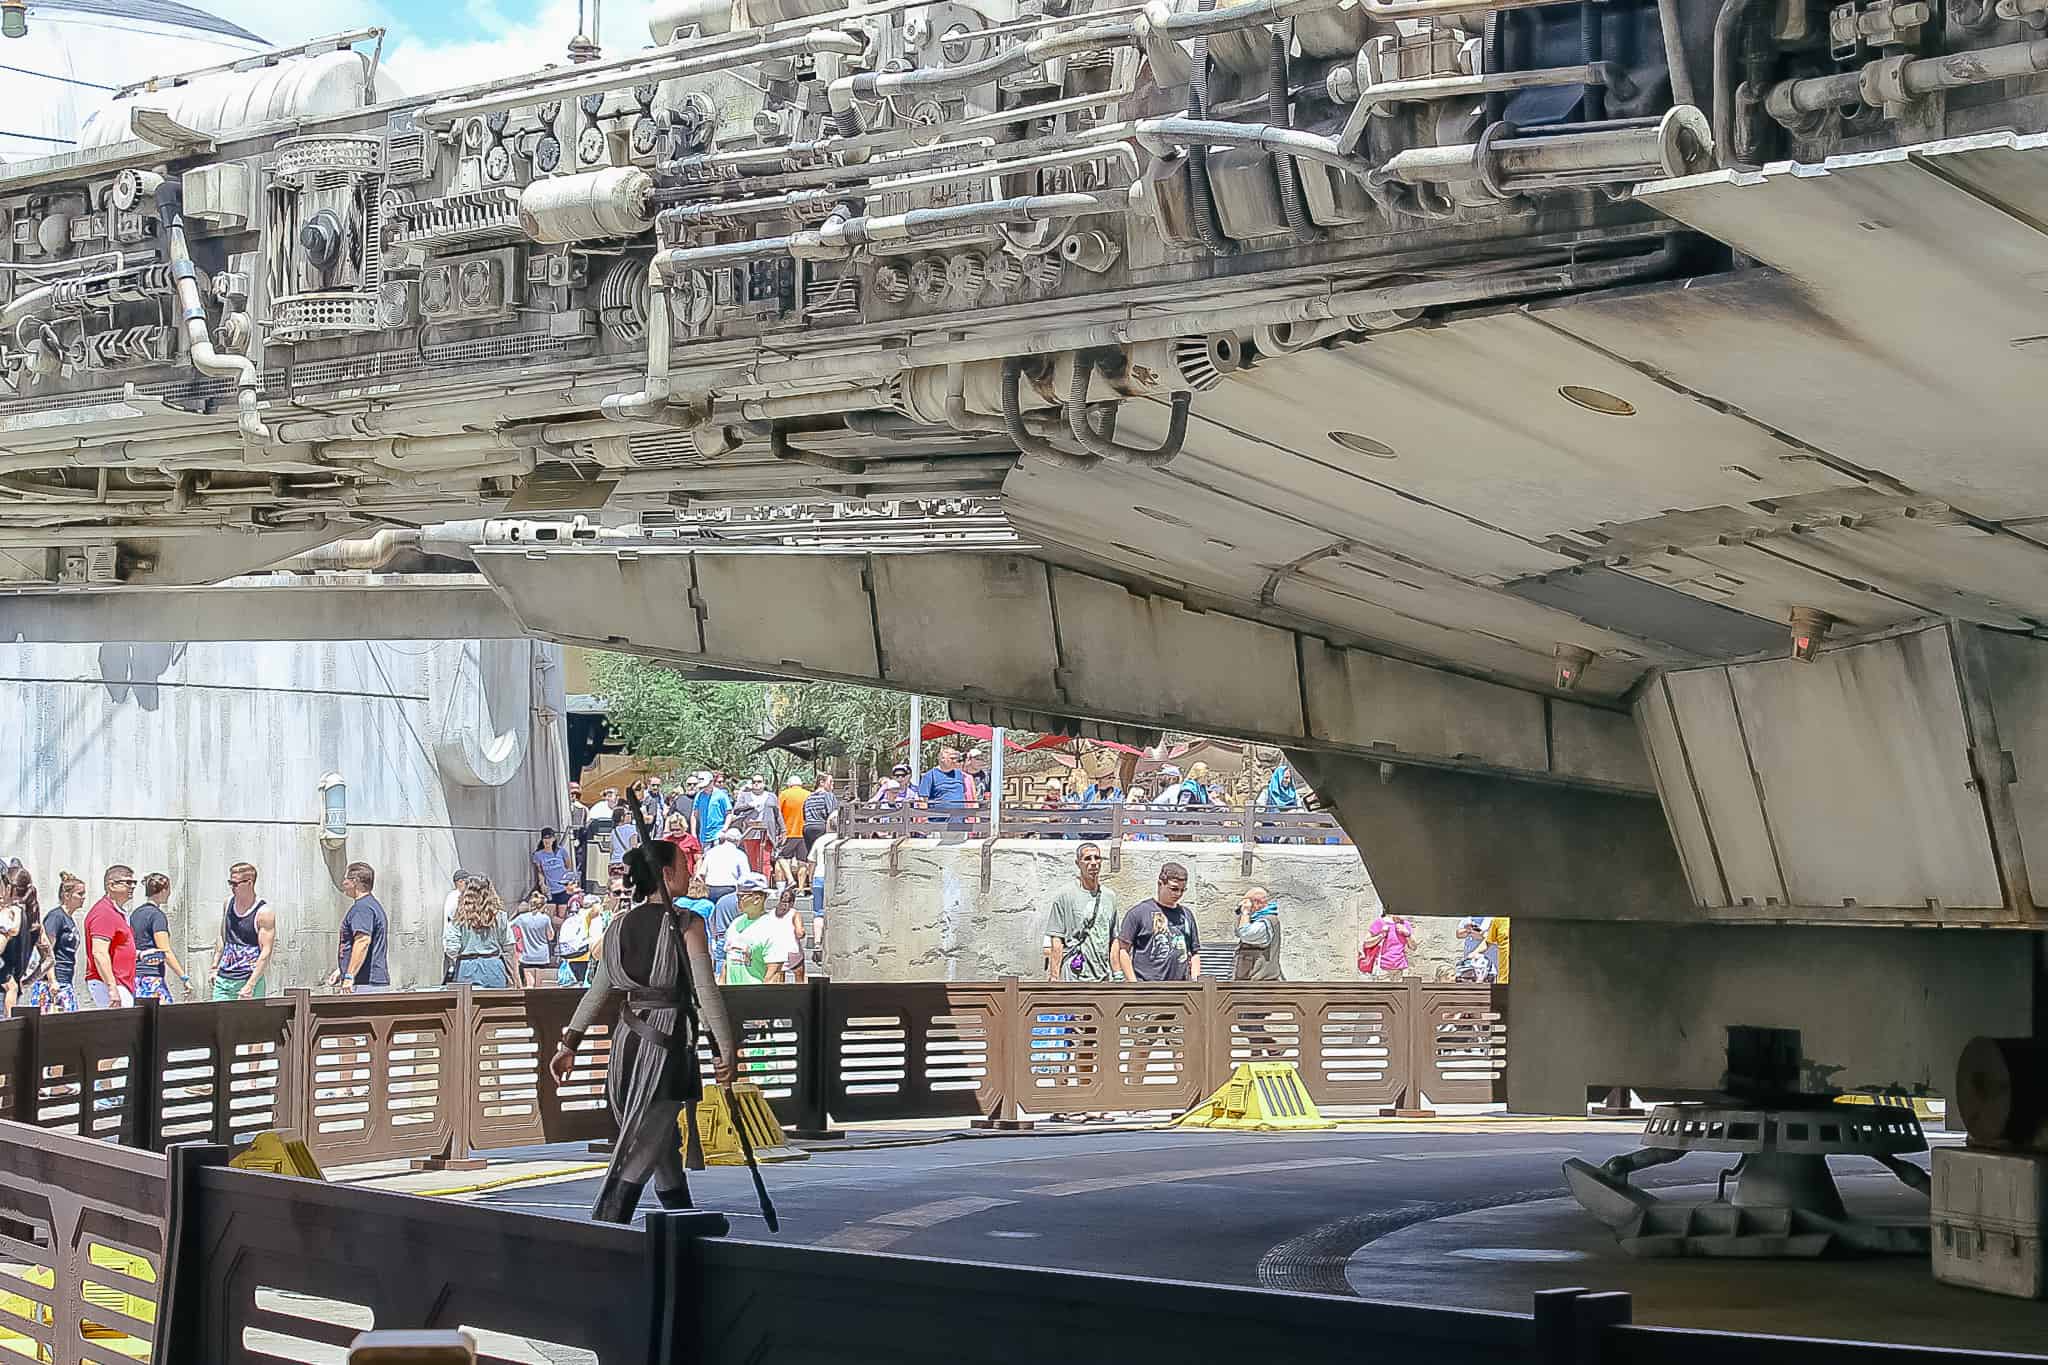 Rey from Star Wars working on the Millennium Falcon at Hollywood Studios. 